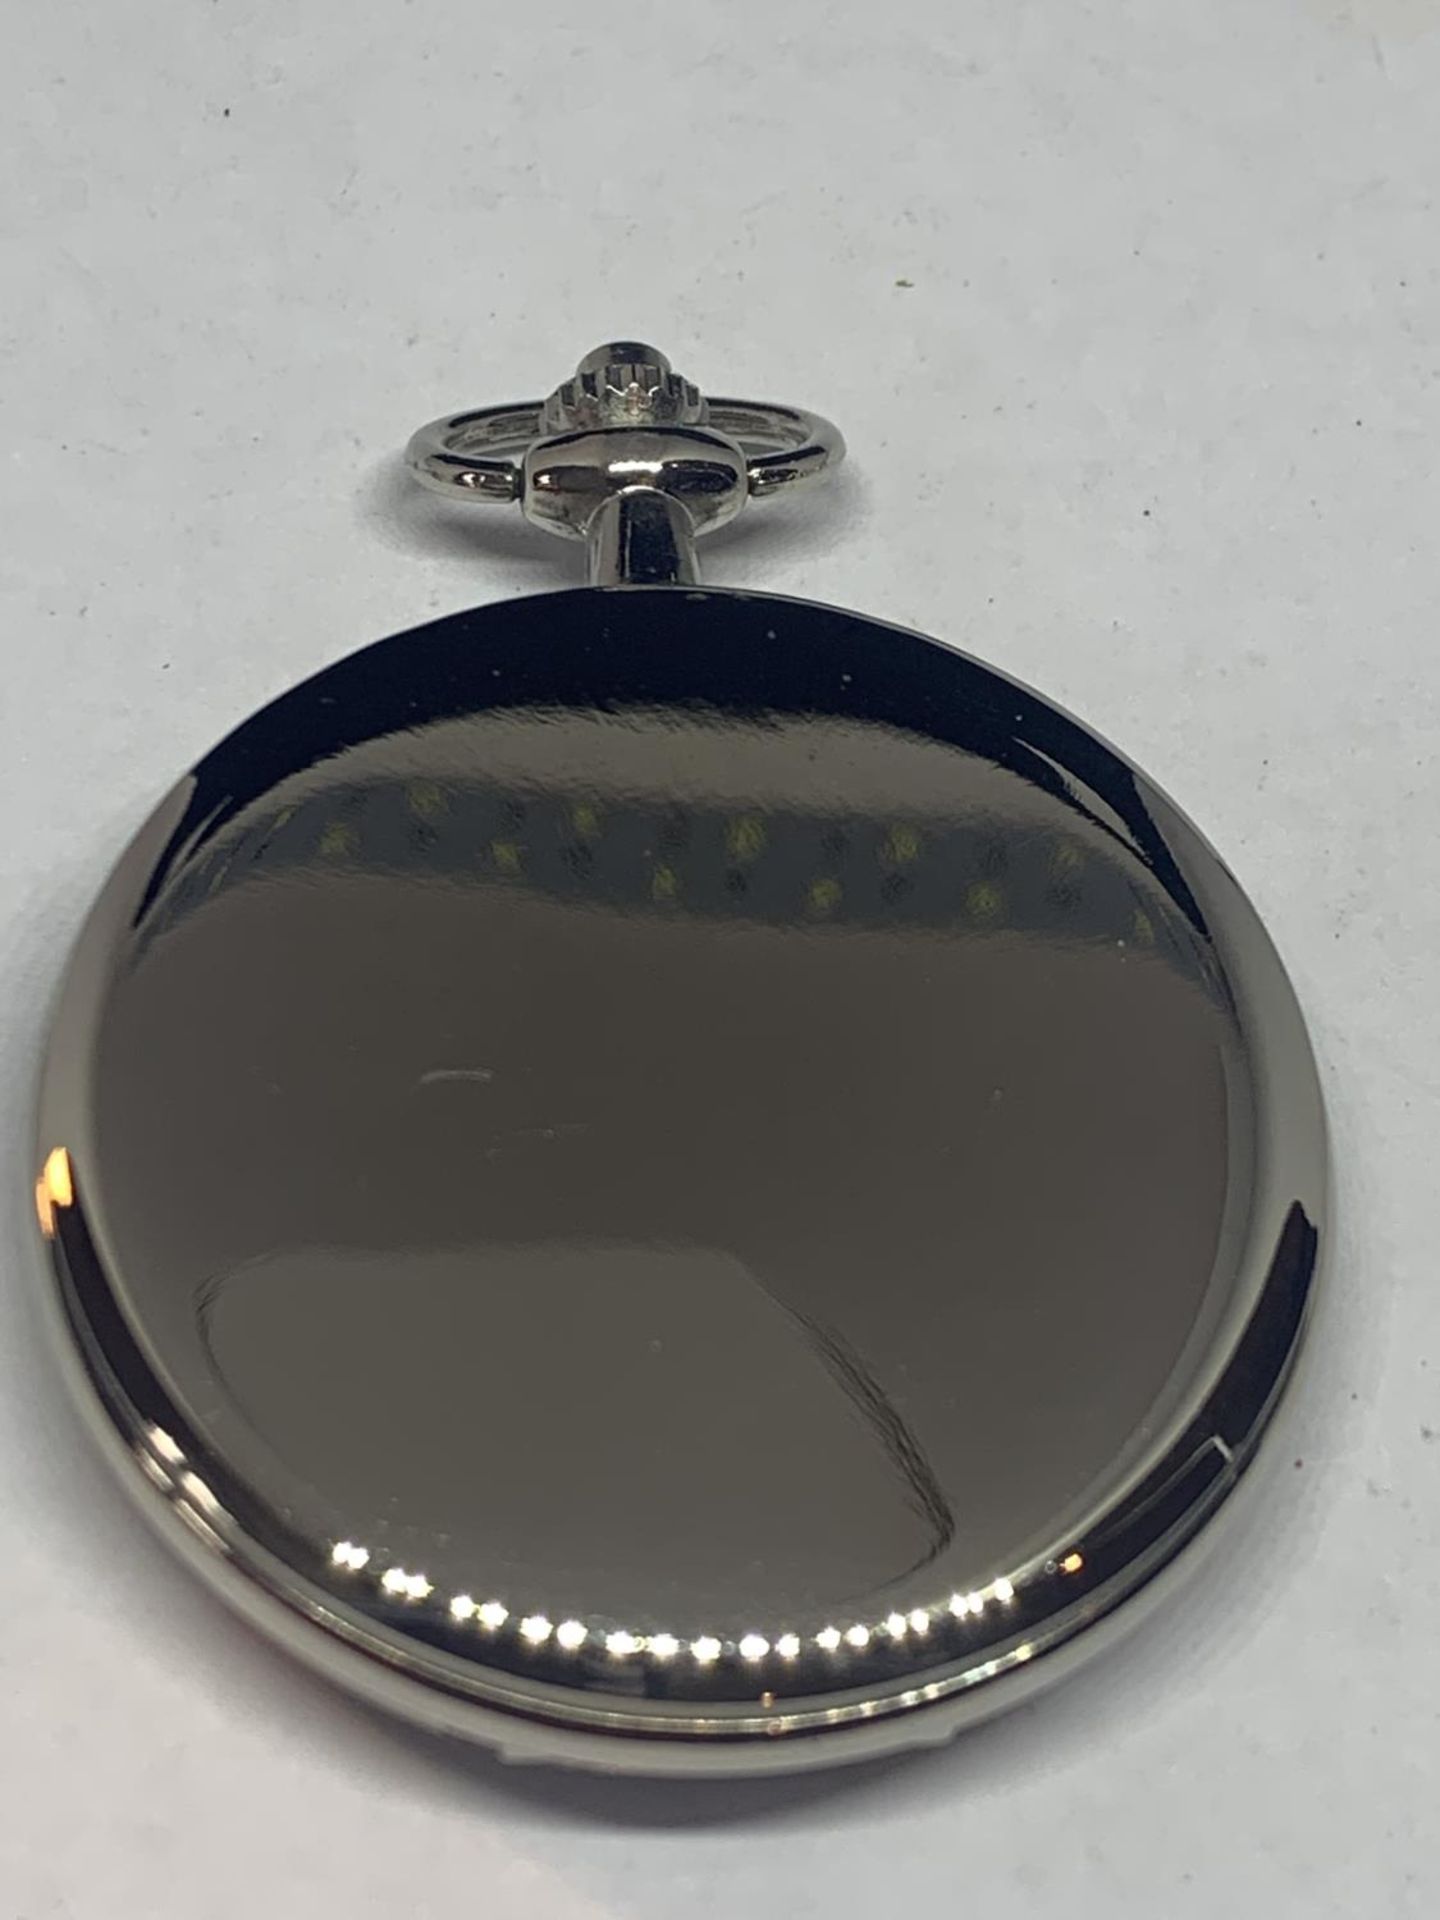 A WHITE METAL POCKET WATCH WITH BLUE ENAMEL STRIPES - Image 2 of 3